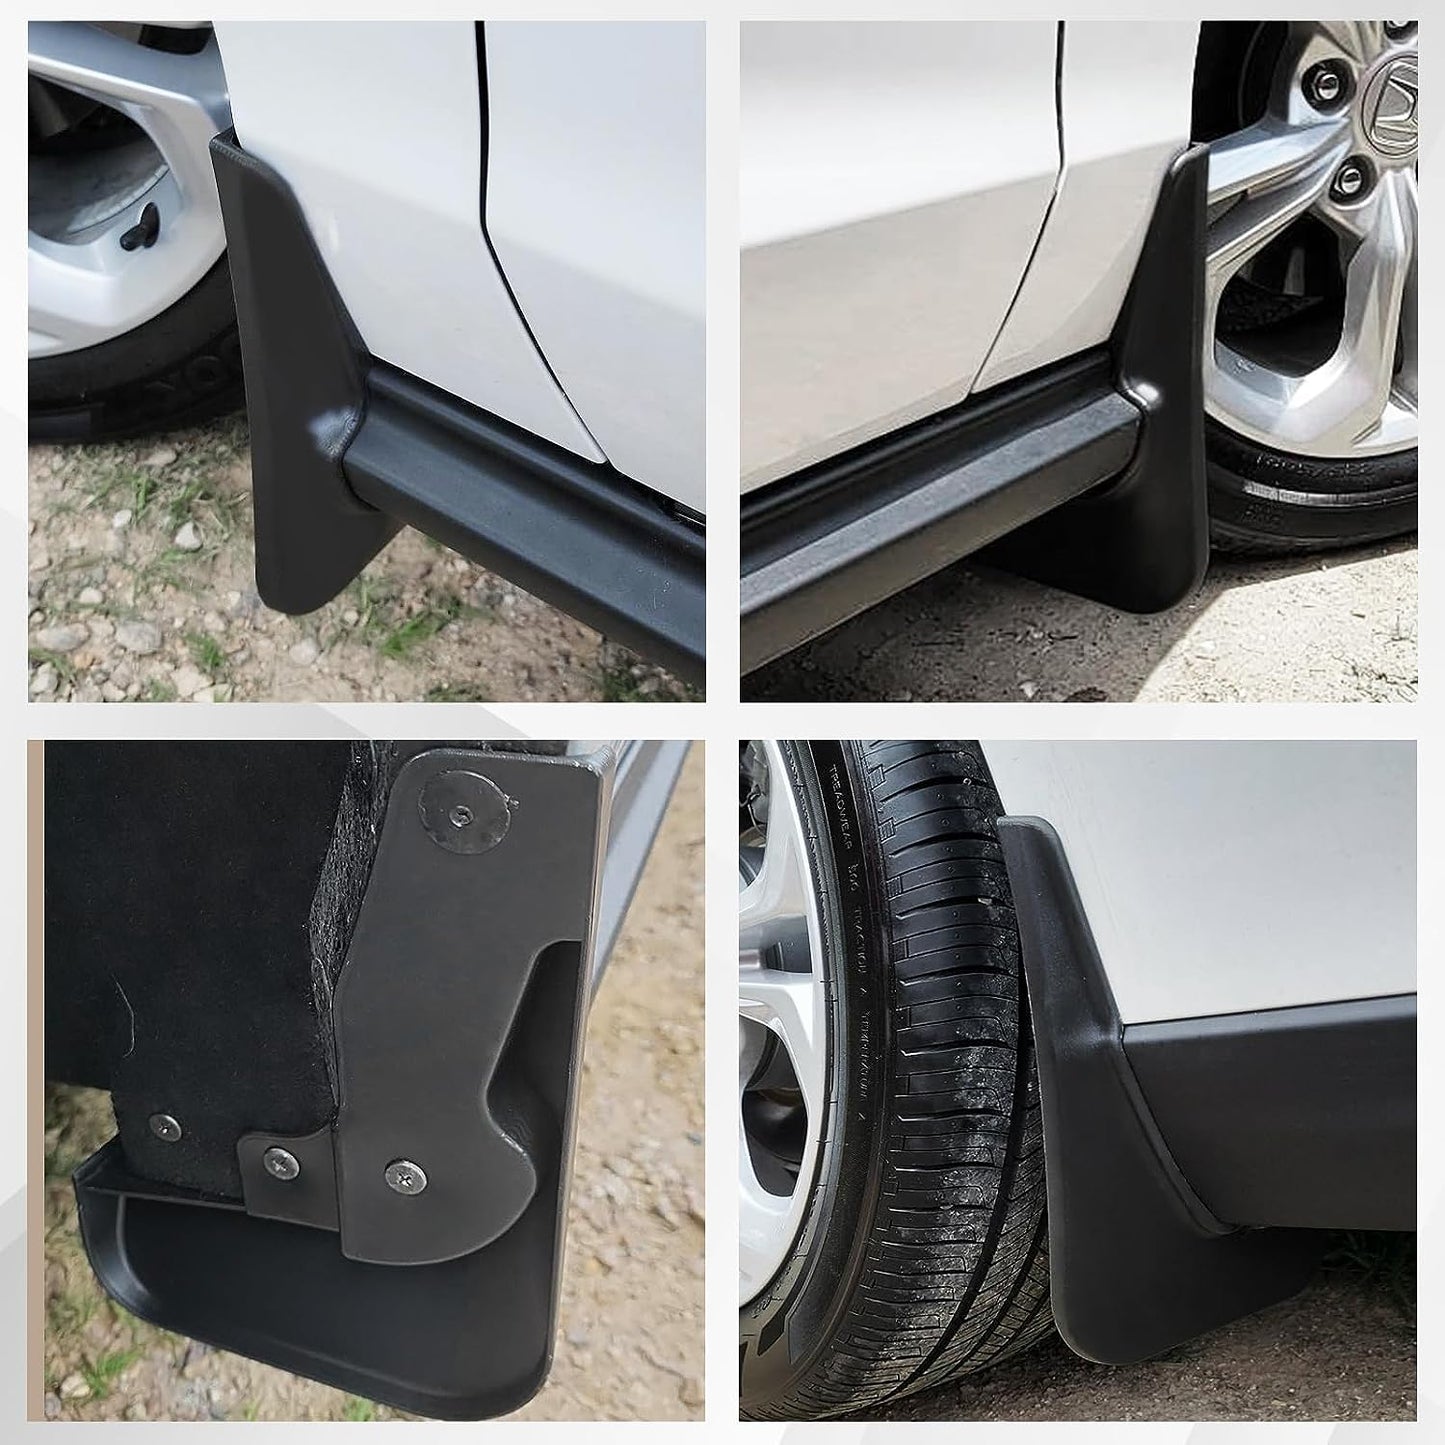 Mud Flaps for 2023 Accord